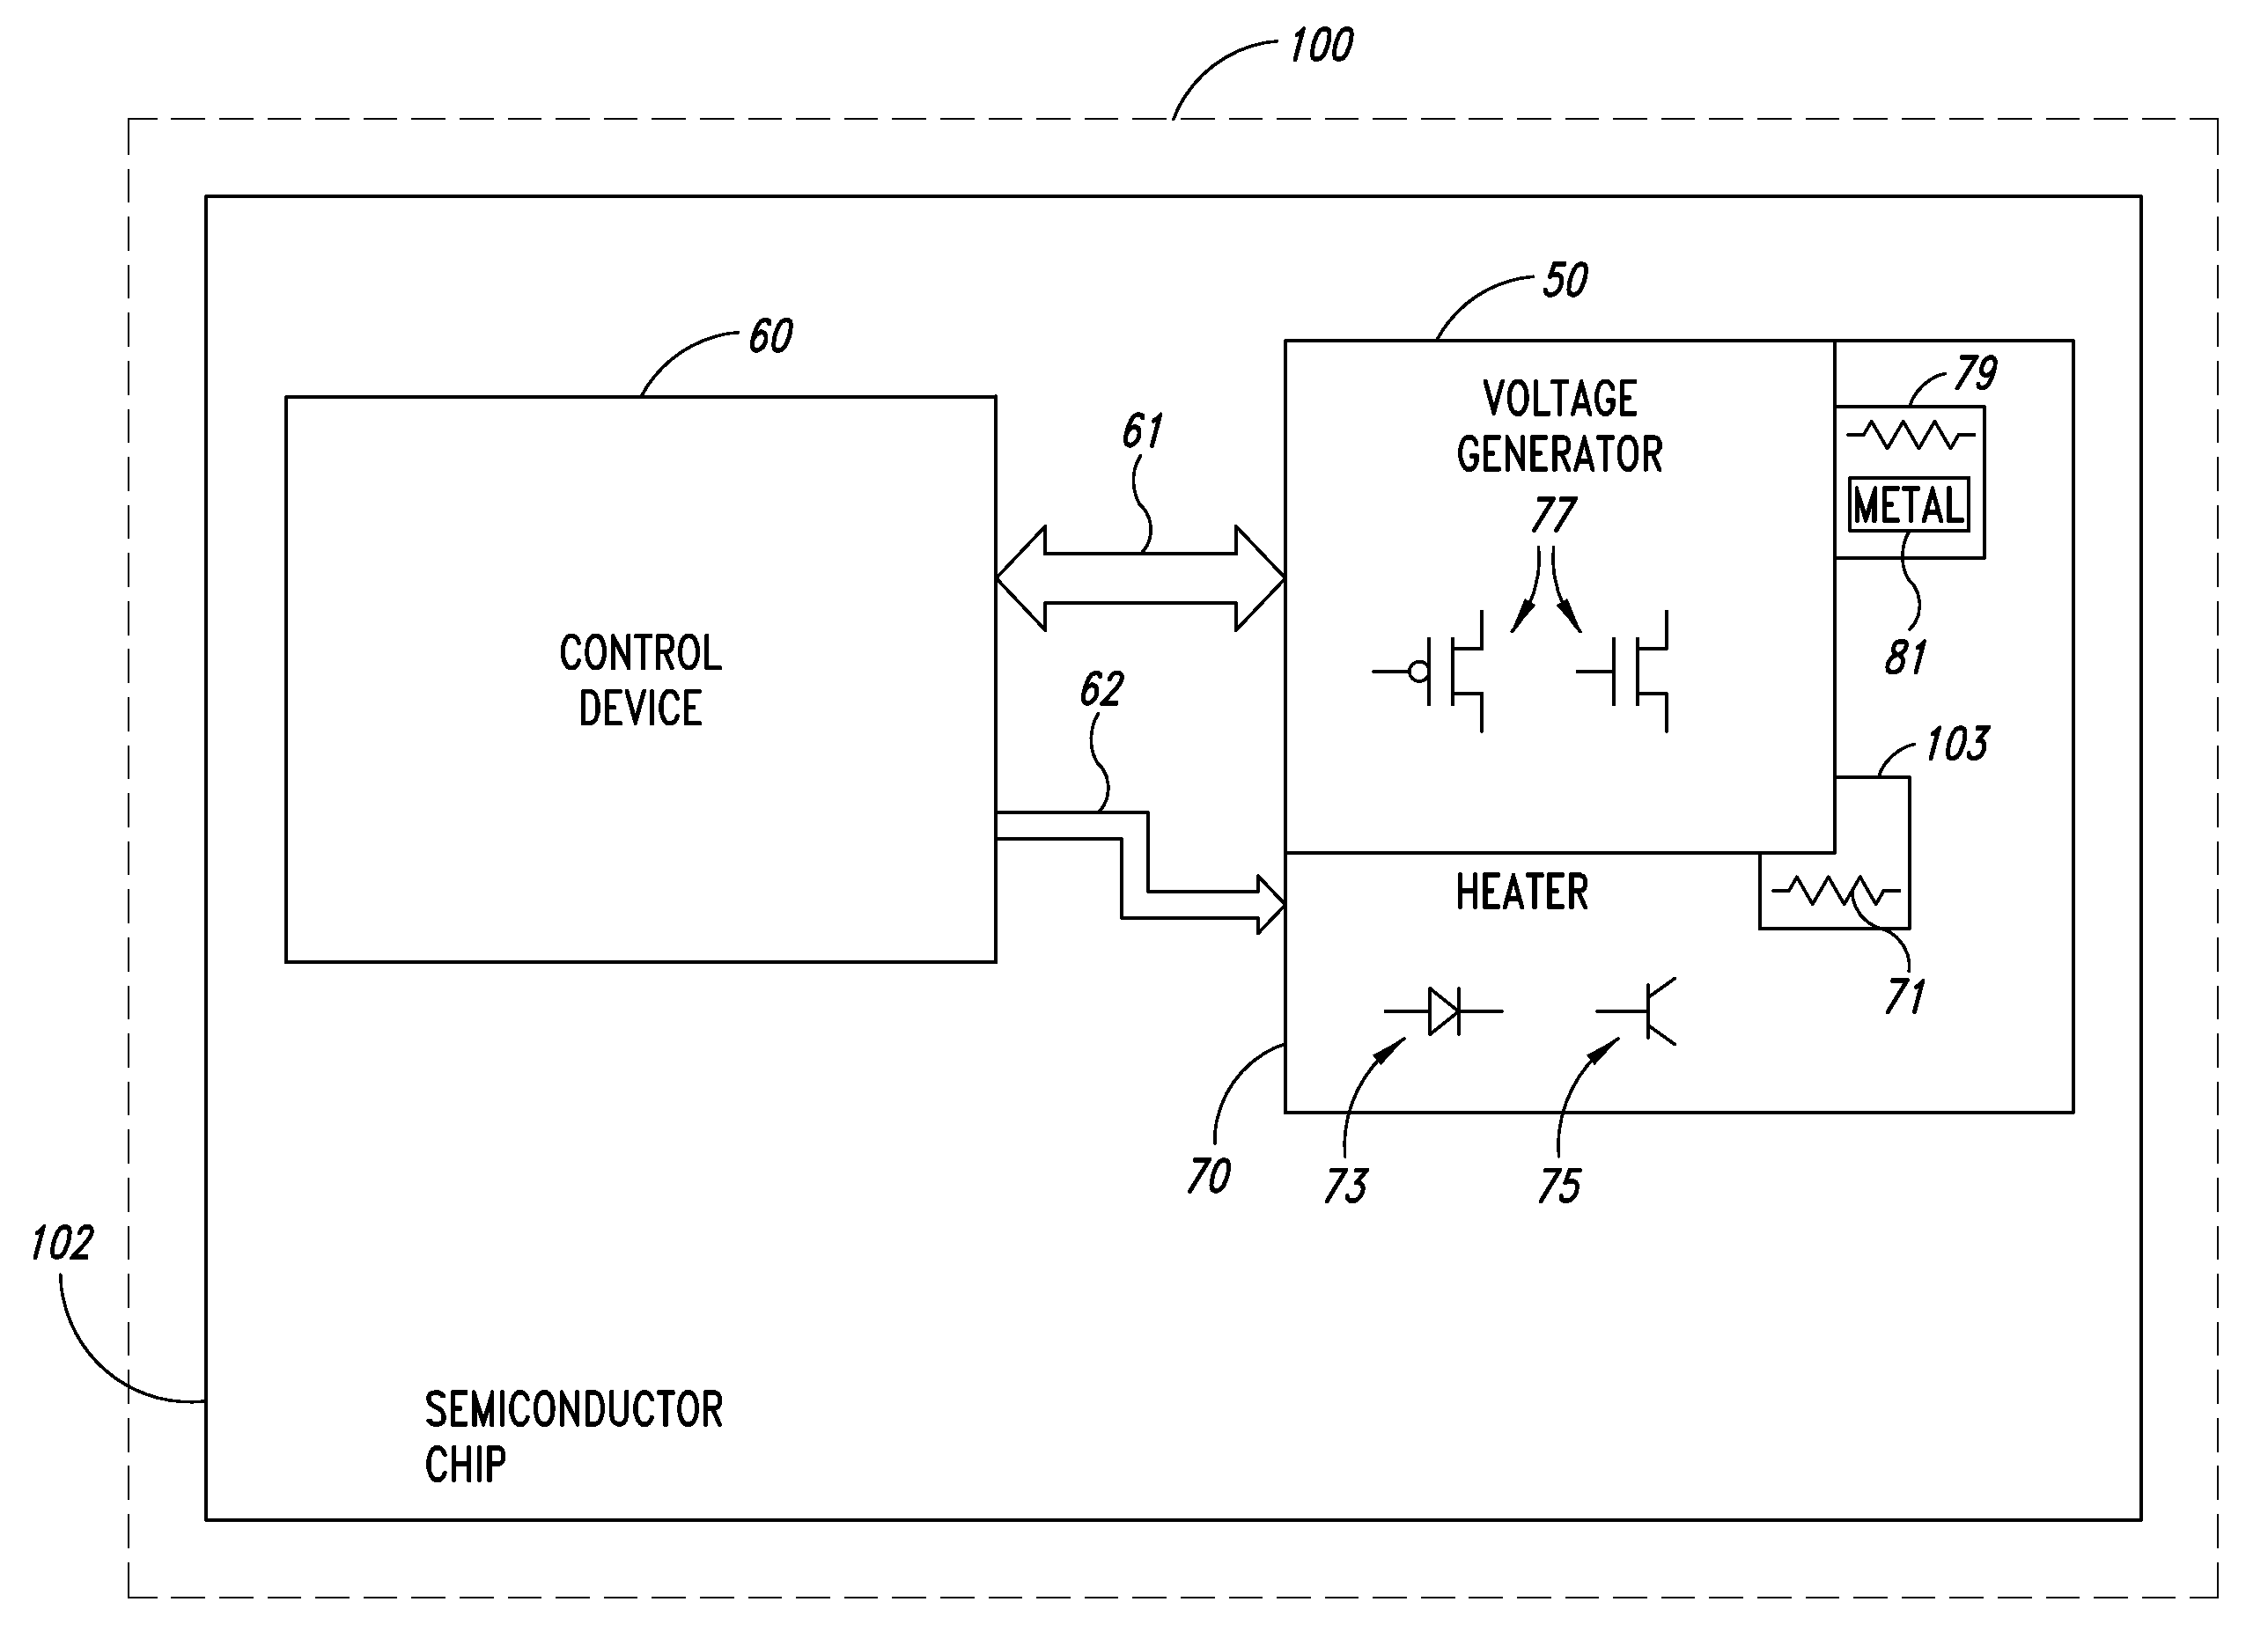 Electrical system, voltage reference generation circuit, and calibration method of the circuit